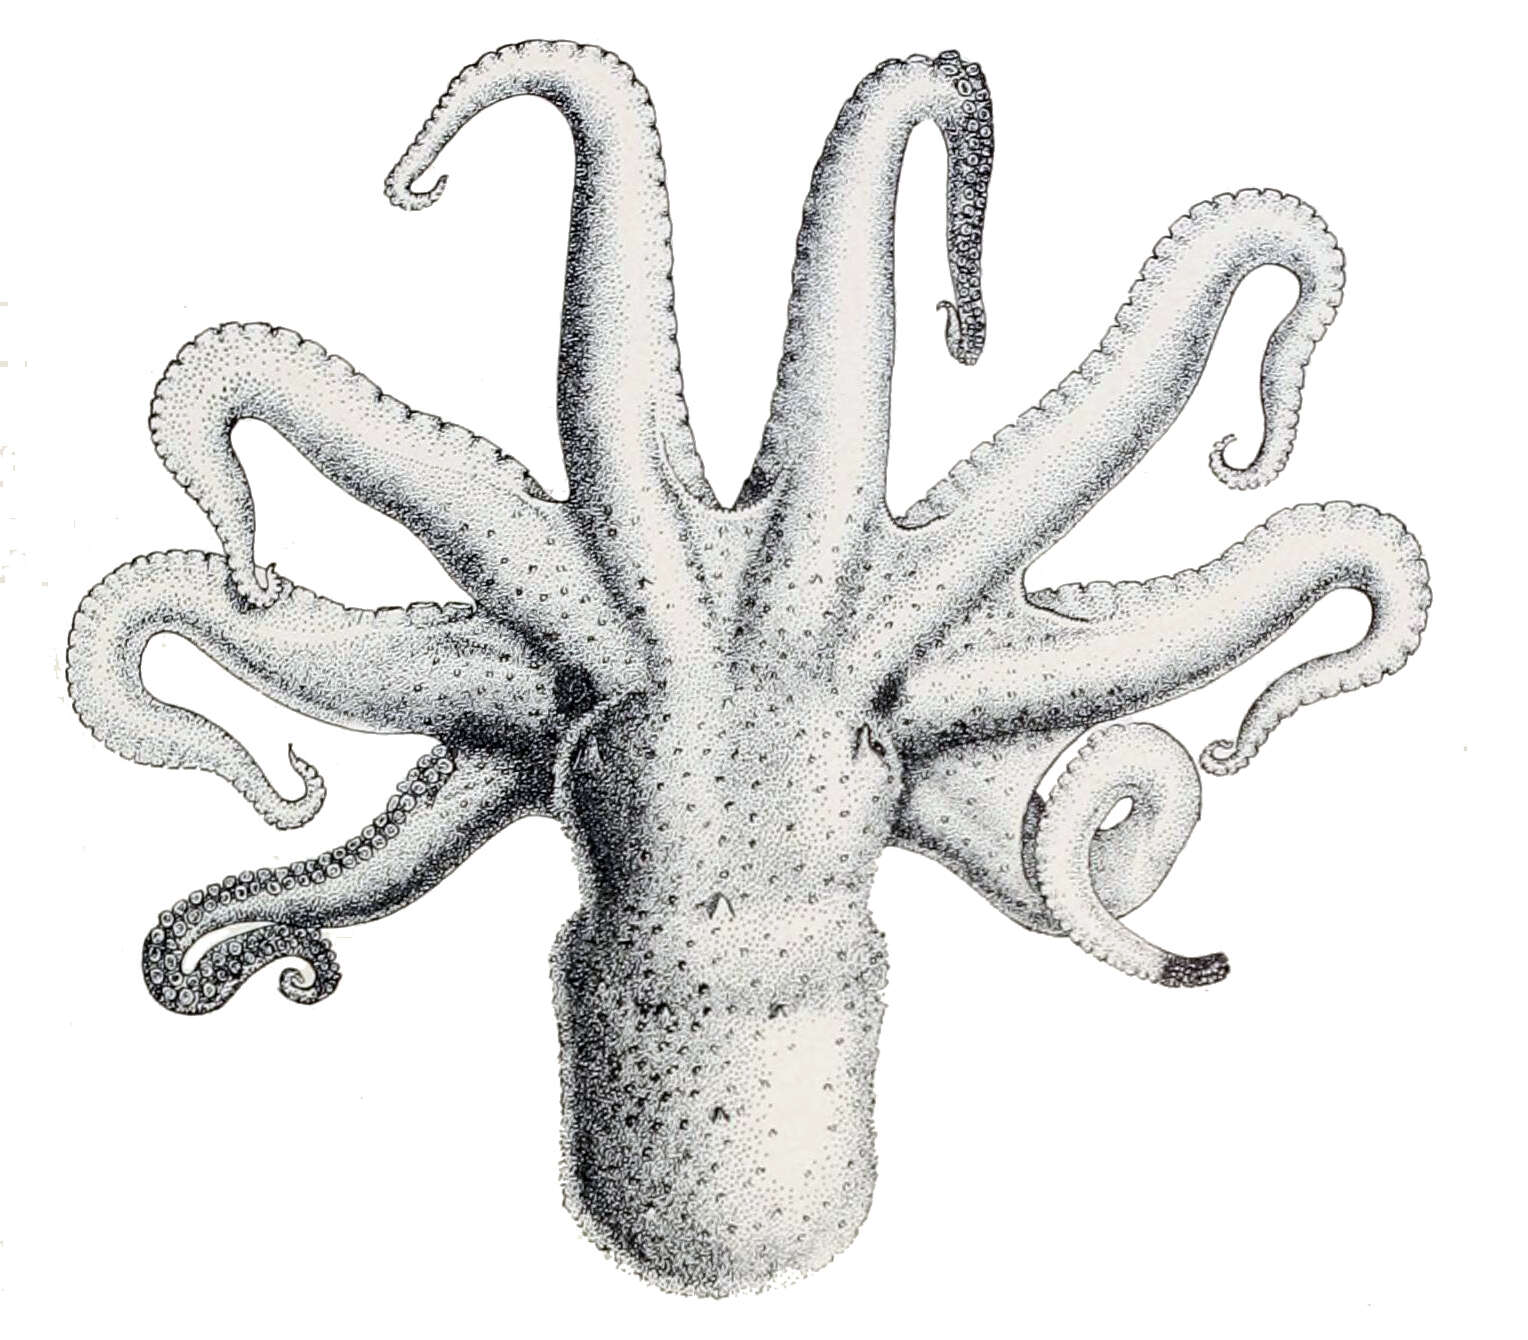 Image of California two-spot octopus